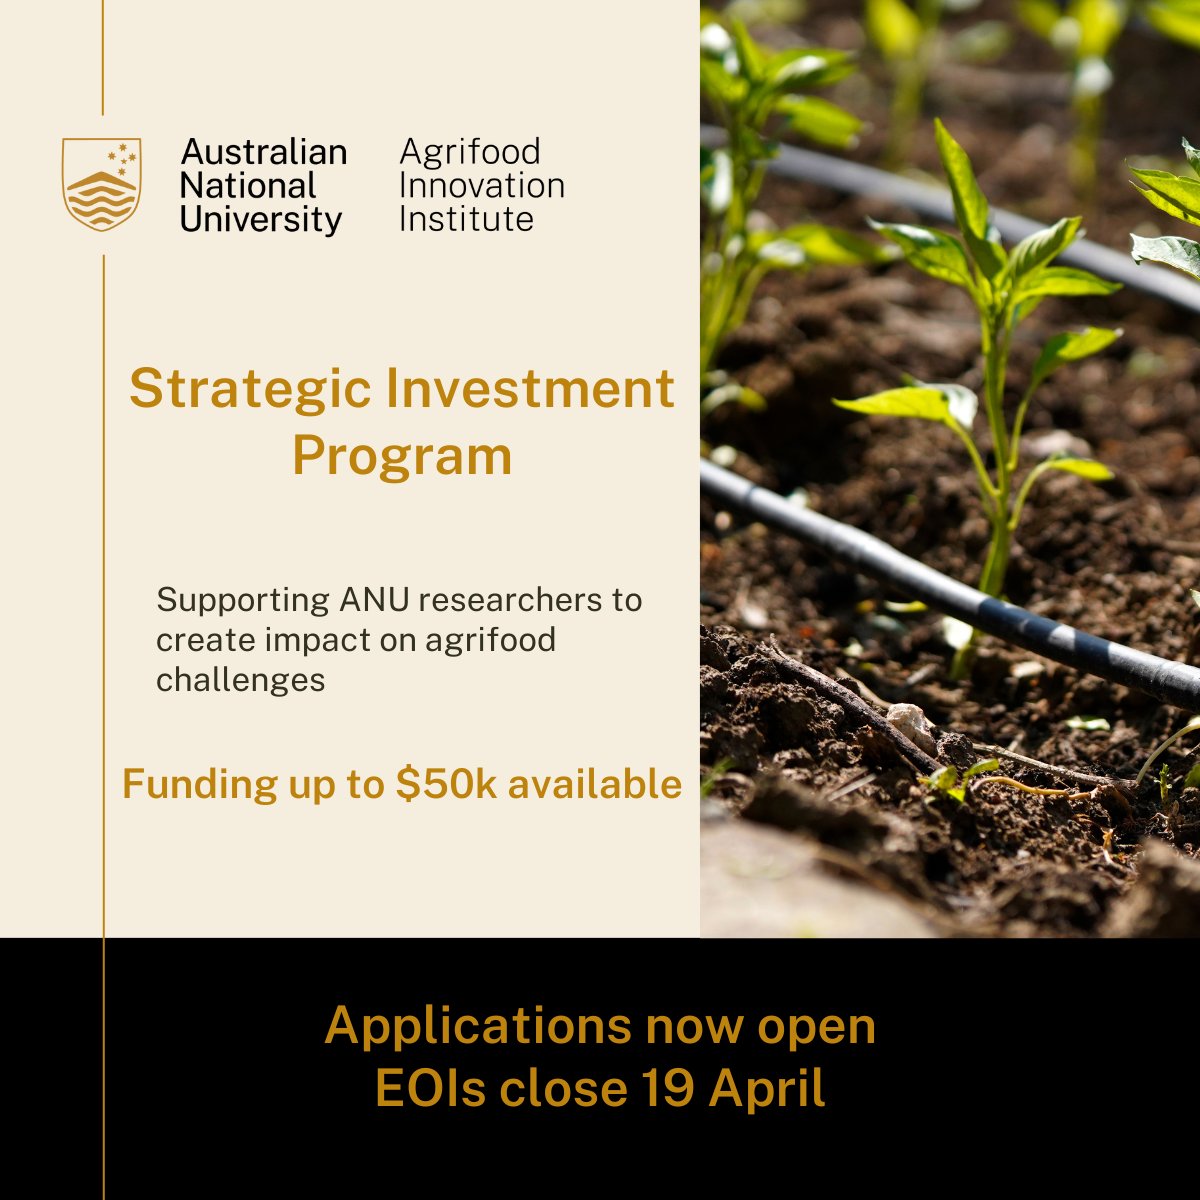 There is still time to get your Expression of Interest in for the AFII Strategic Investment Program. Funding of up to $50k is available to @ourANU researchers for projects that help address agrifood challenges through collaboration with industry. See: ceat.org.au/ceat-strategic…